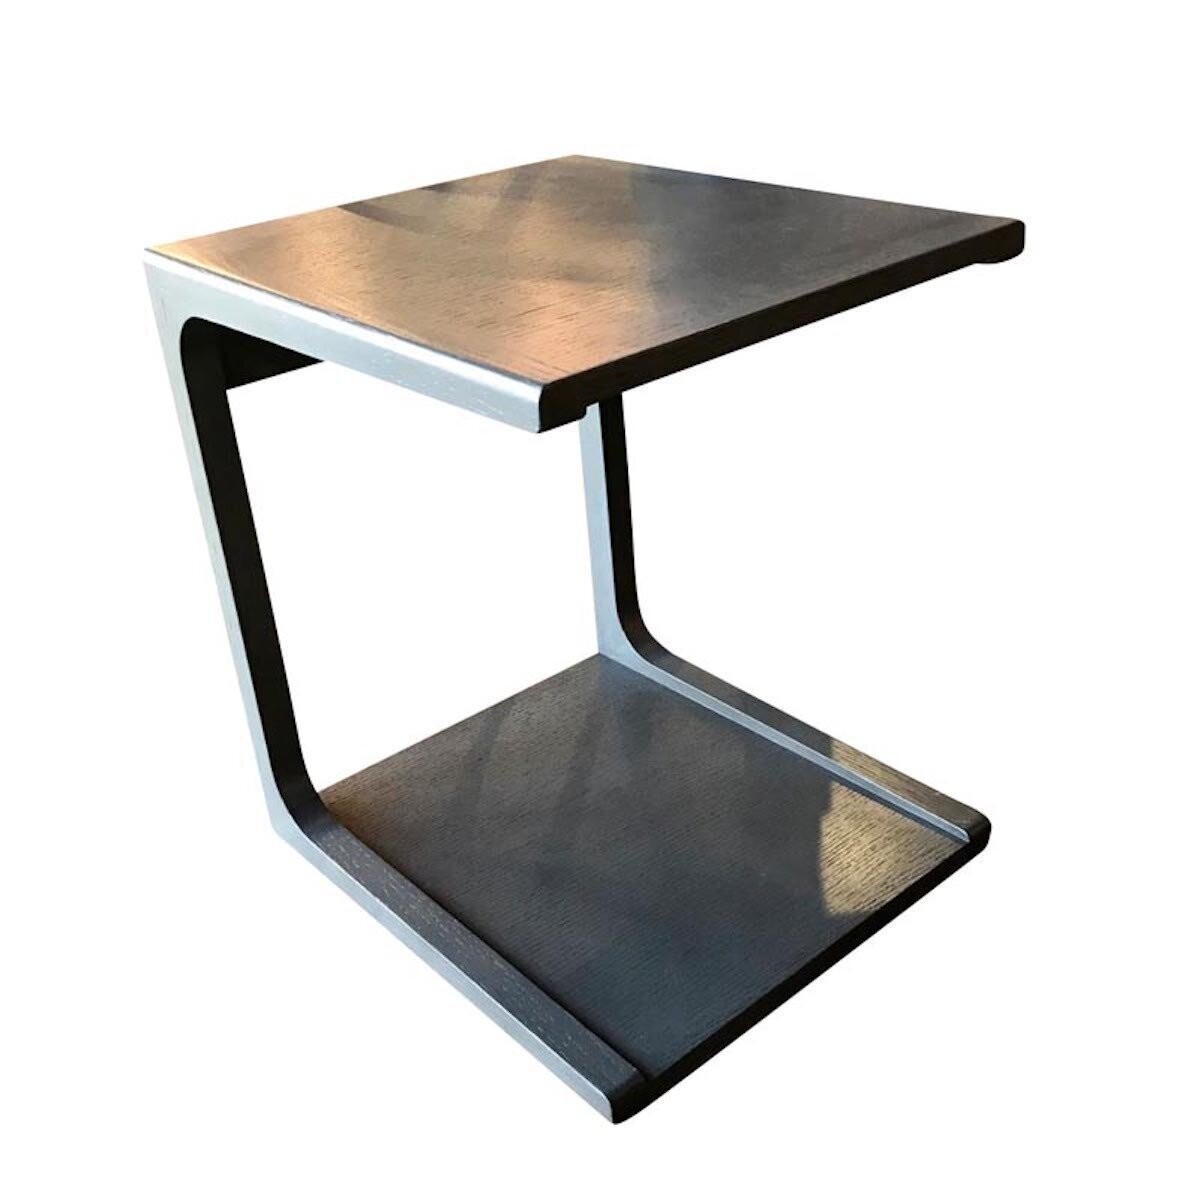 Mate Table